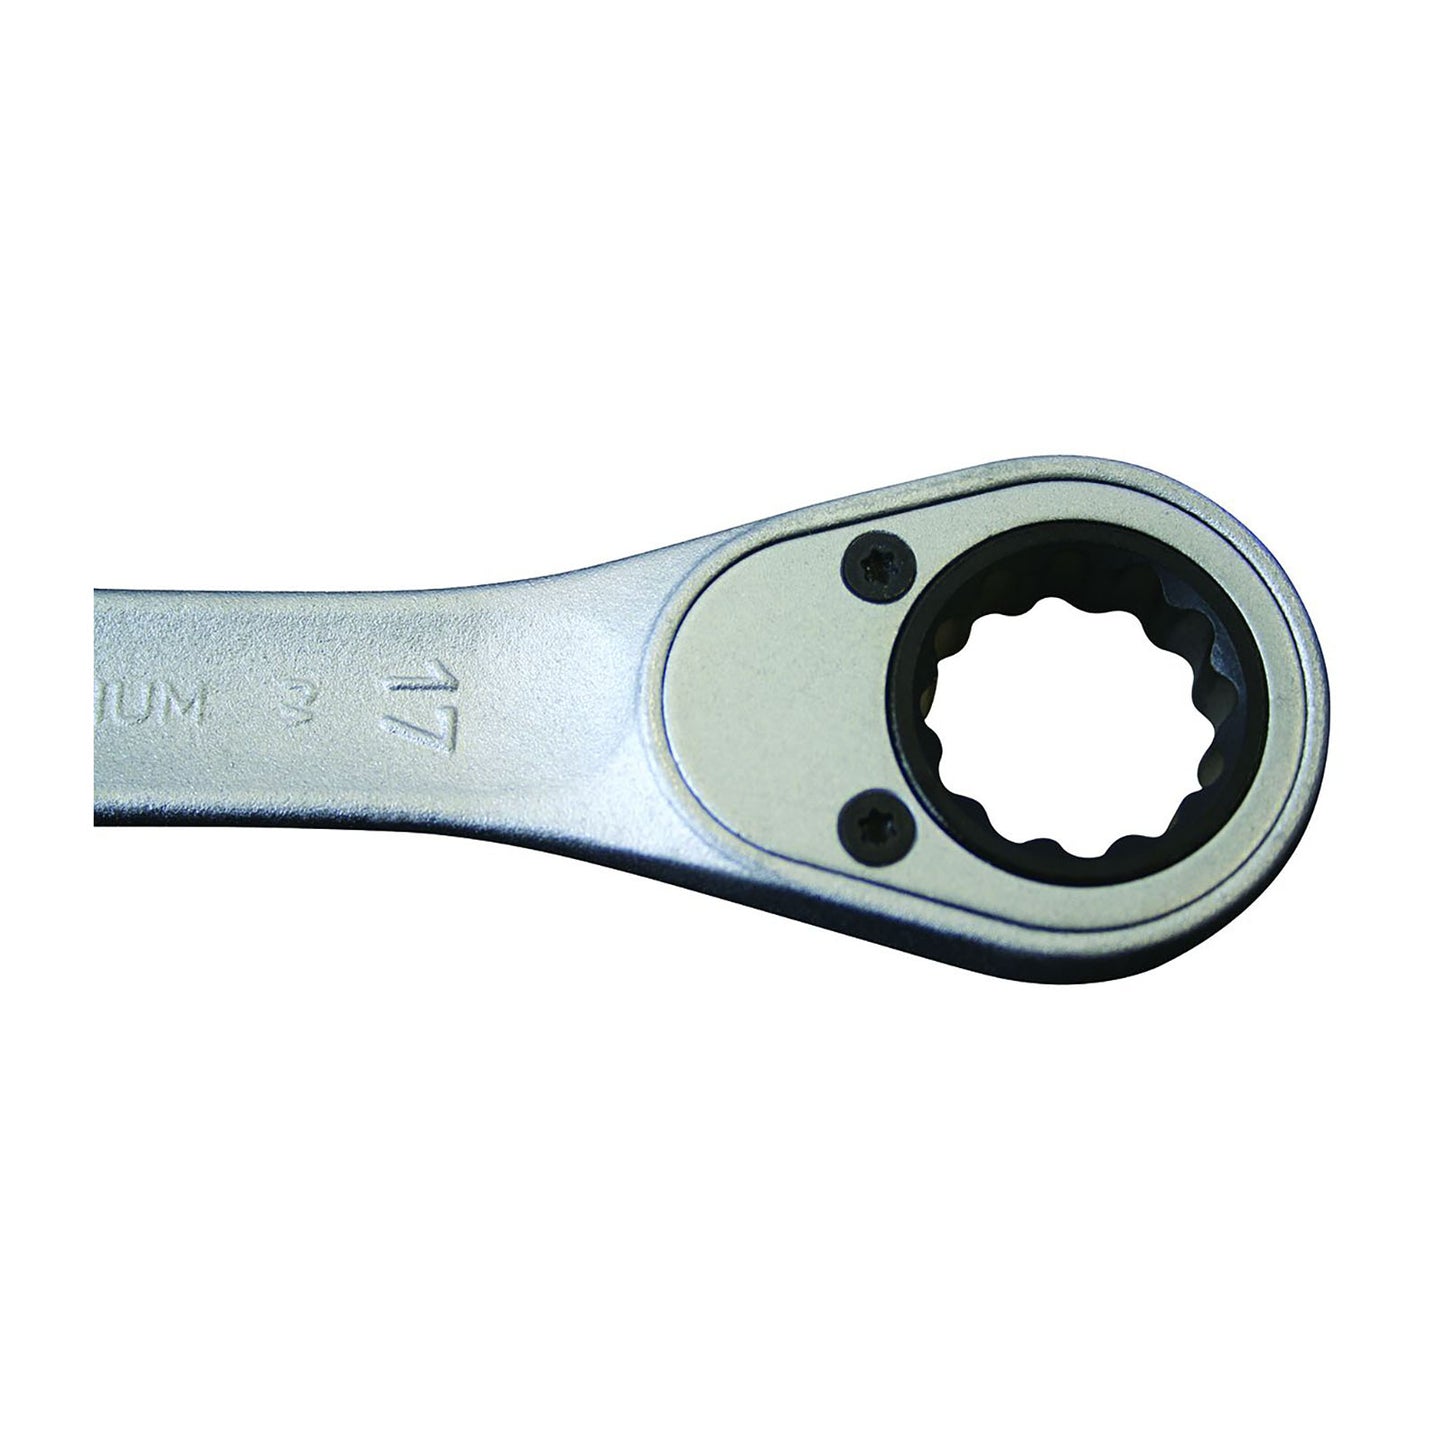 GEDORE 7 R 24 - Ratchet combination wrench, 24mm (2297205)